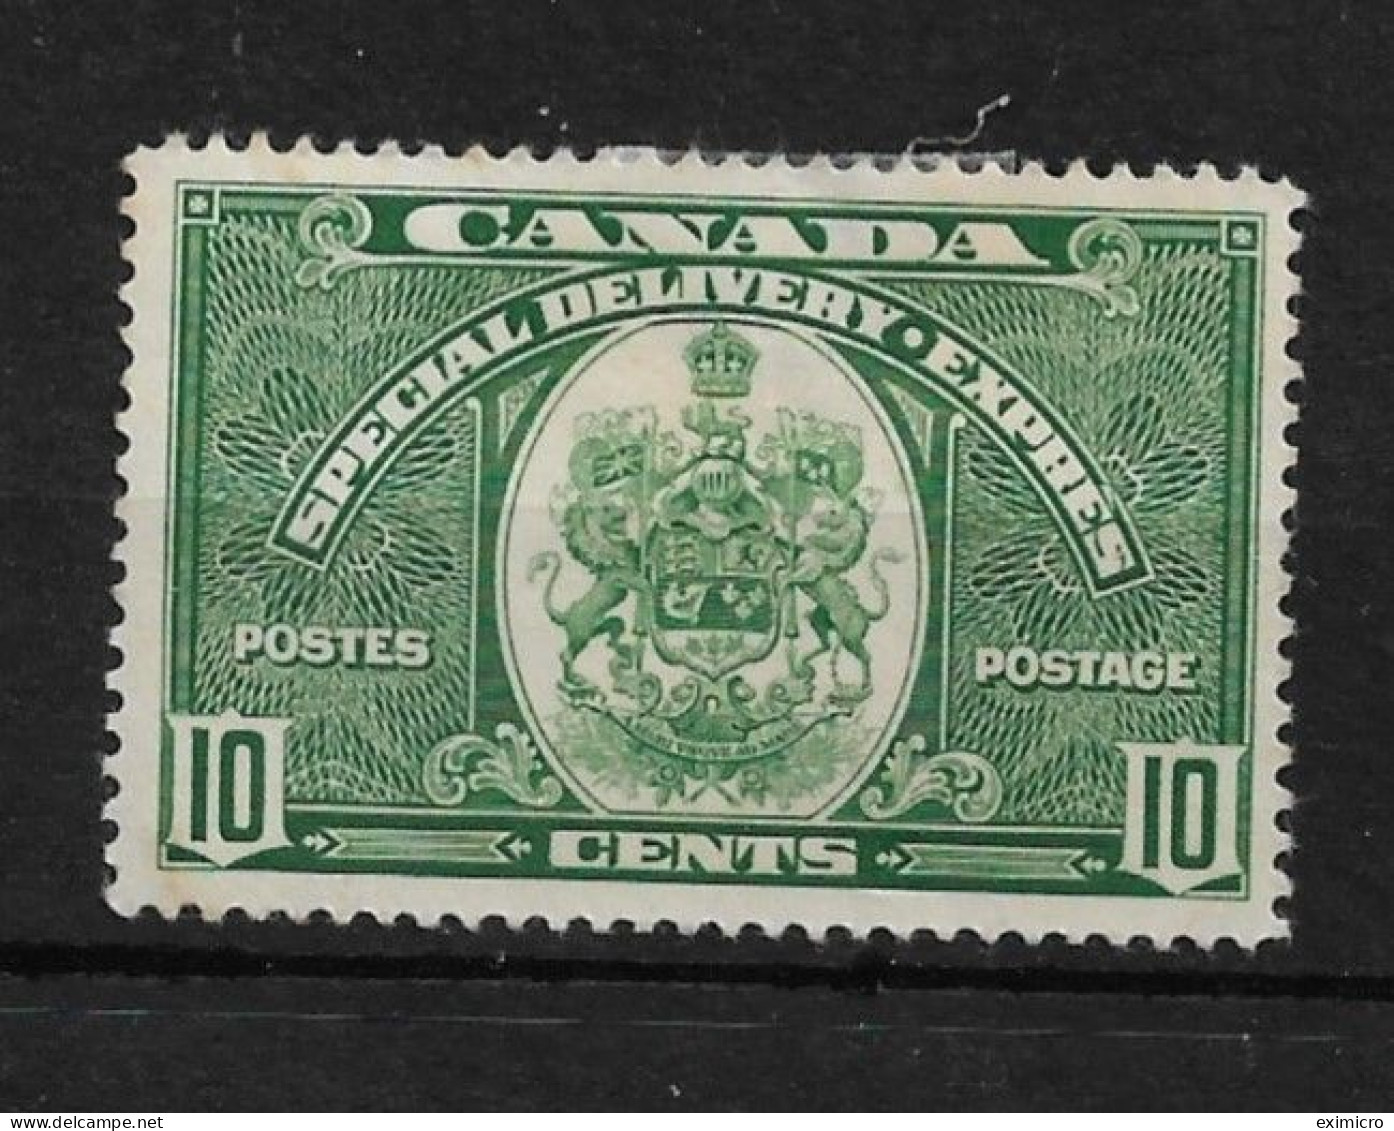 CANADA 1939 10c SPECIAL DELIVERY SG S9 MOUNTED MINT Cat £24 - Correo Urgente